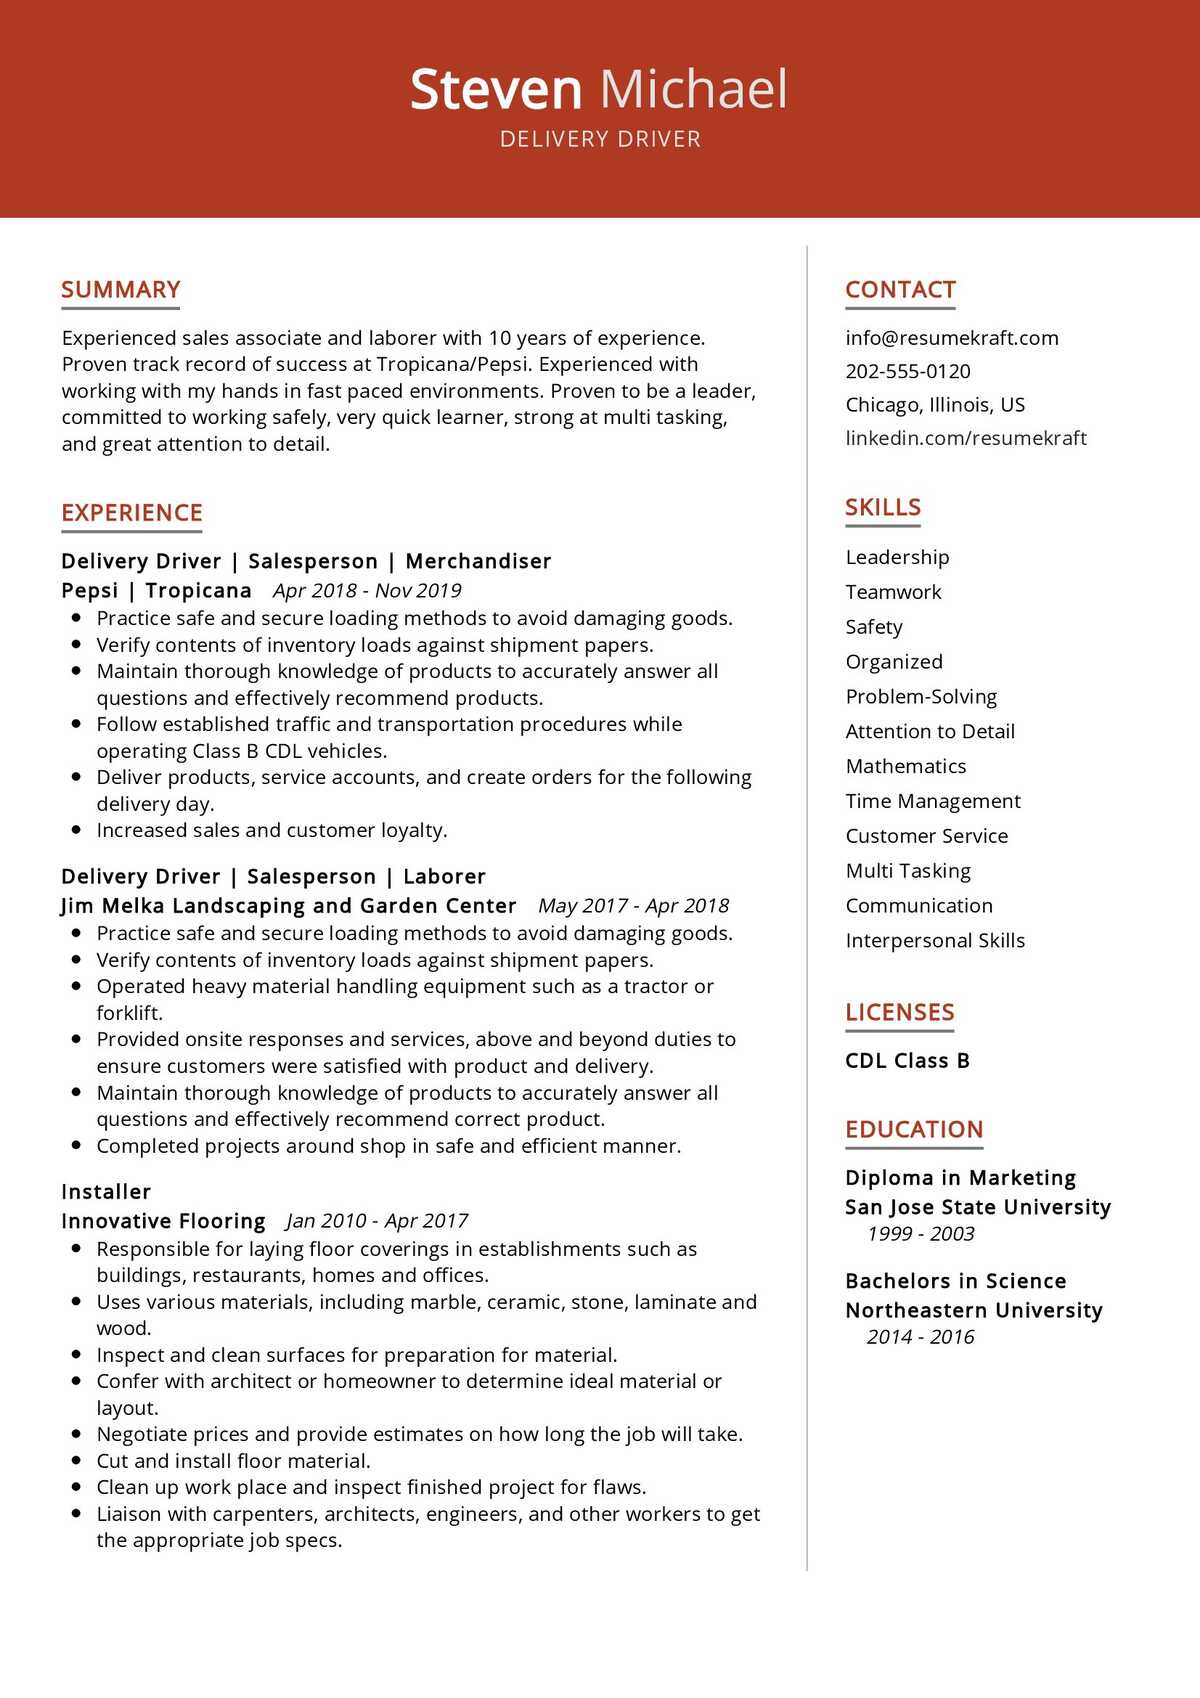 Resume Sample for Telecommunication order Processing Delivery Driver Resume Sample 2021 Writing Guide & Tips …